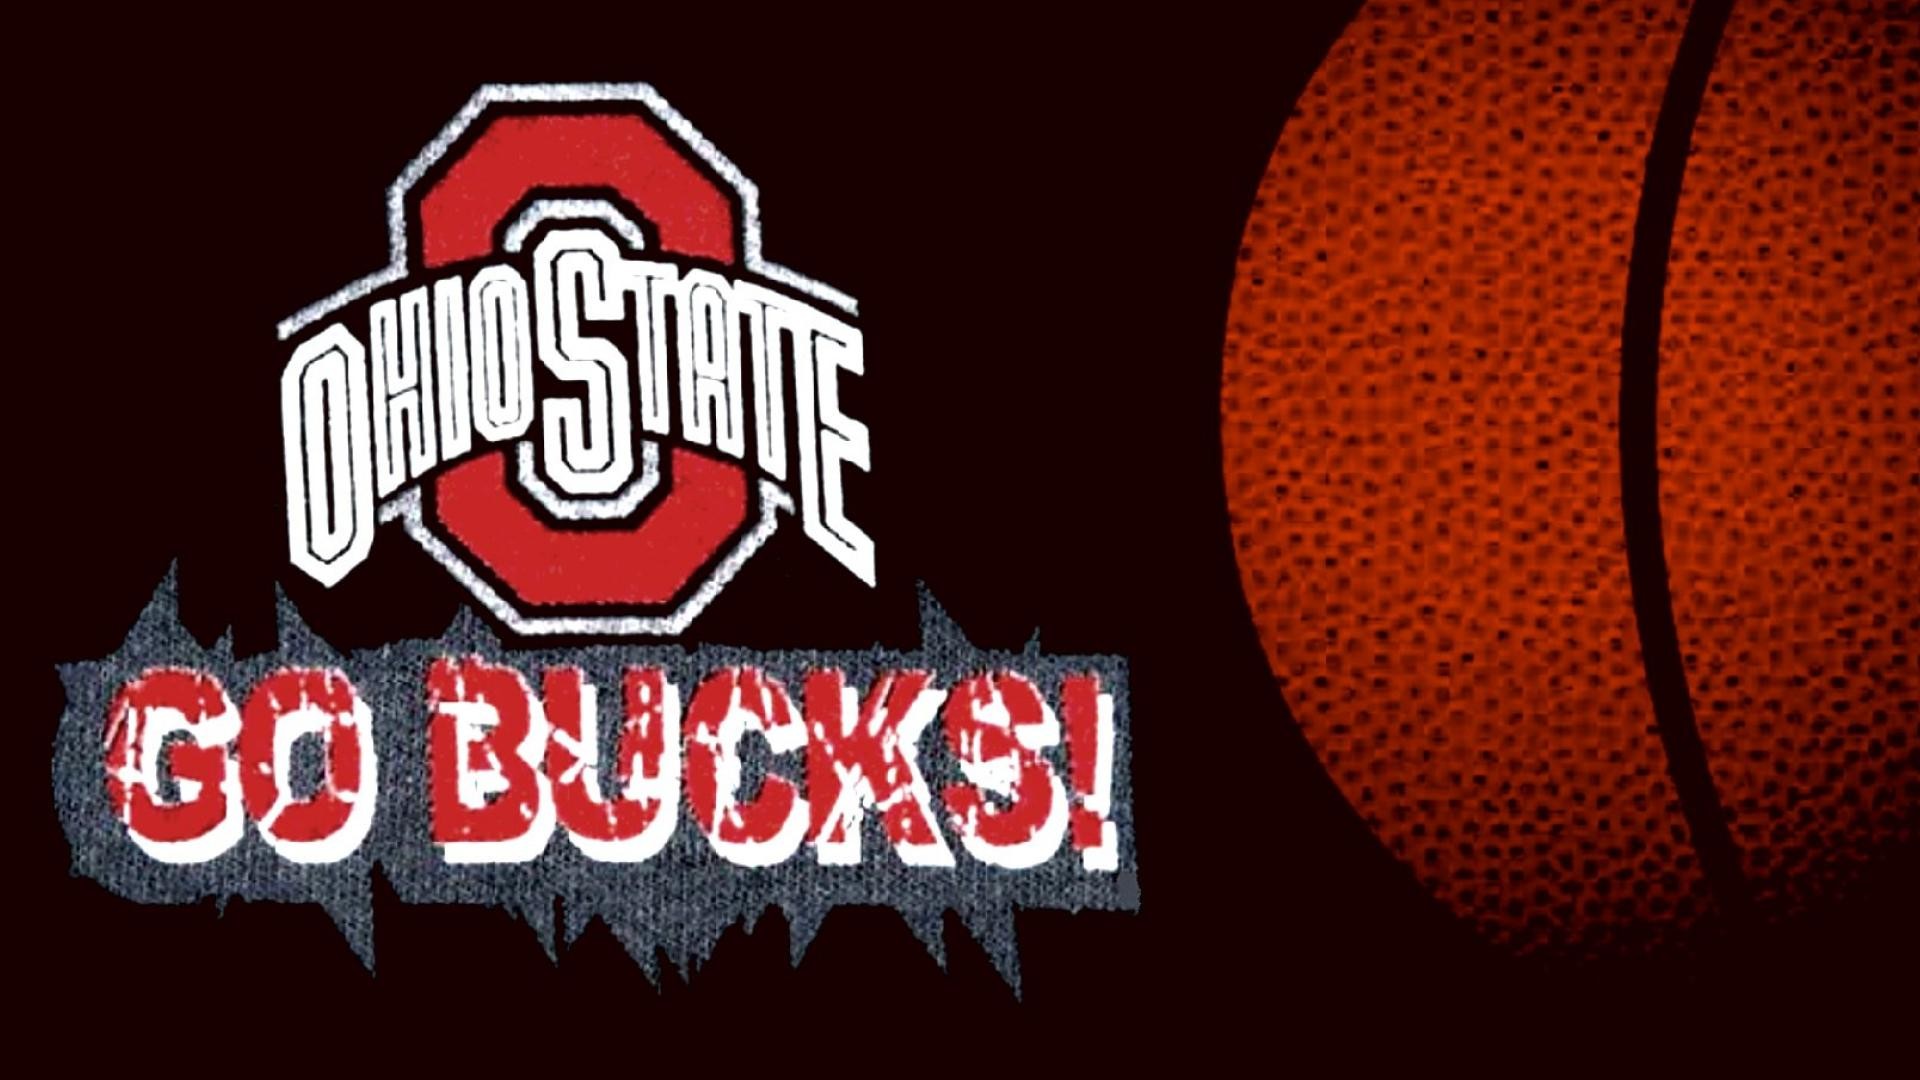 1920x1080 Ohio State Basketball Wallpapers Wallpaper Cave